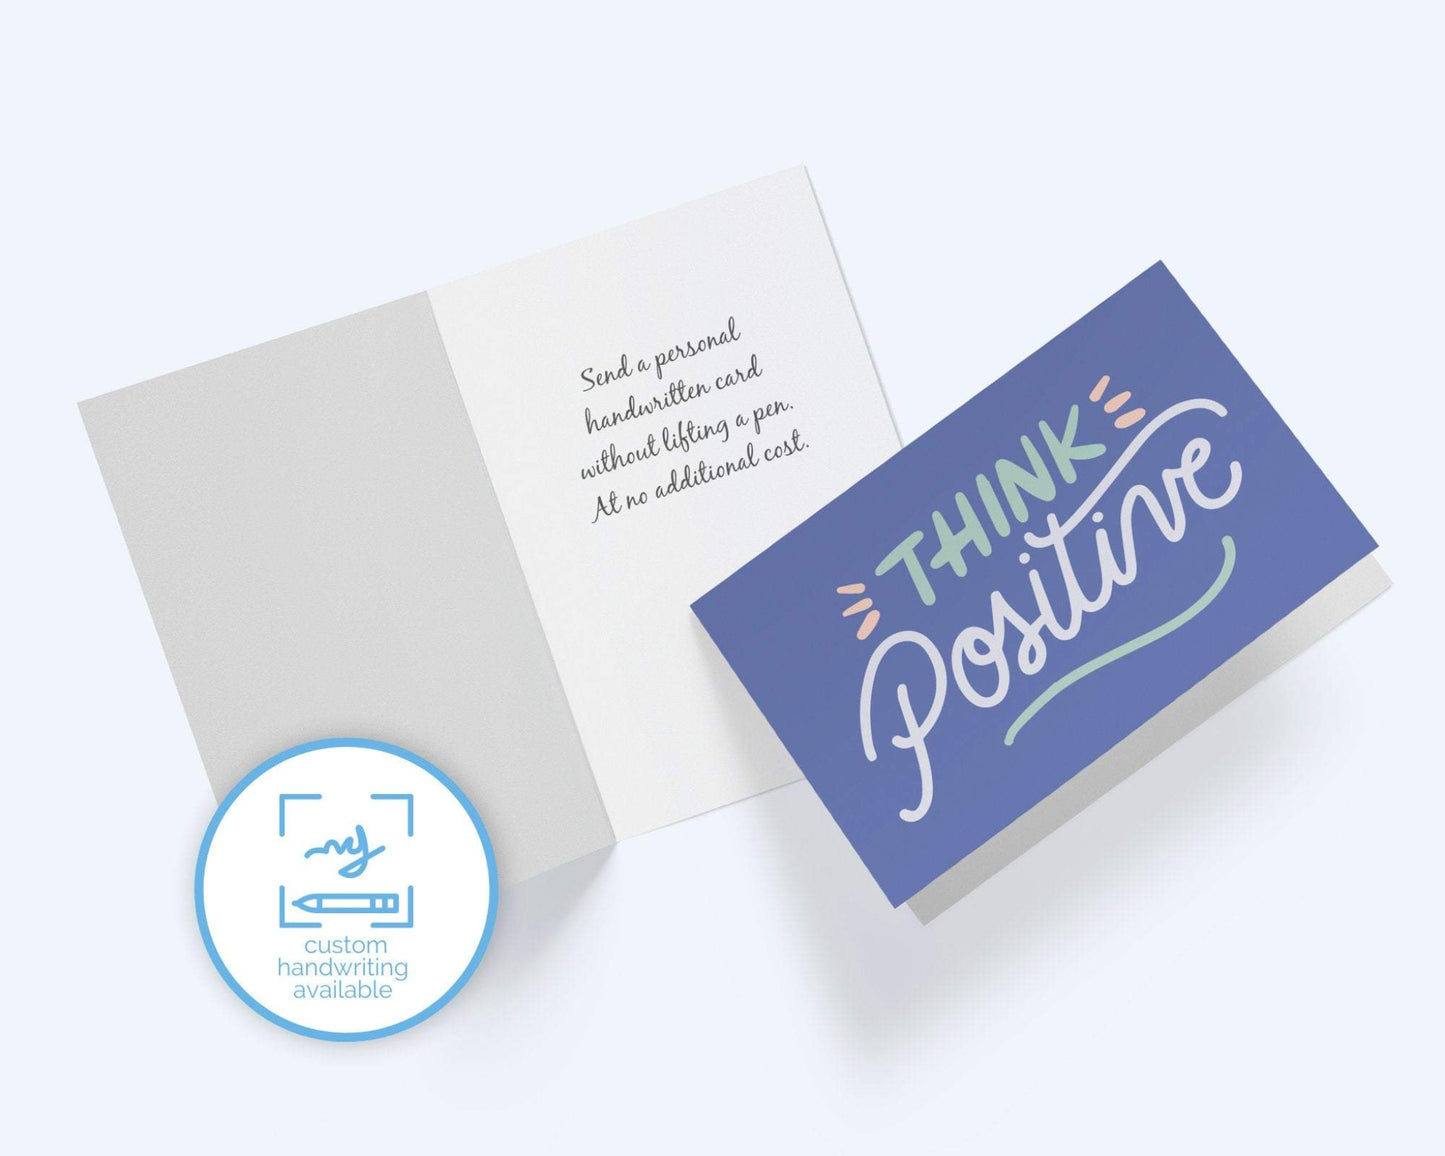 Think Positive: Encouragement Greeting Card.